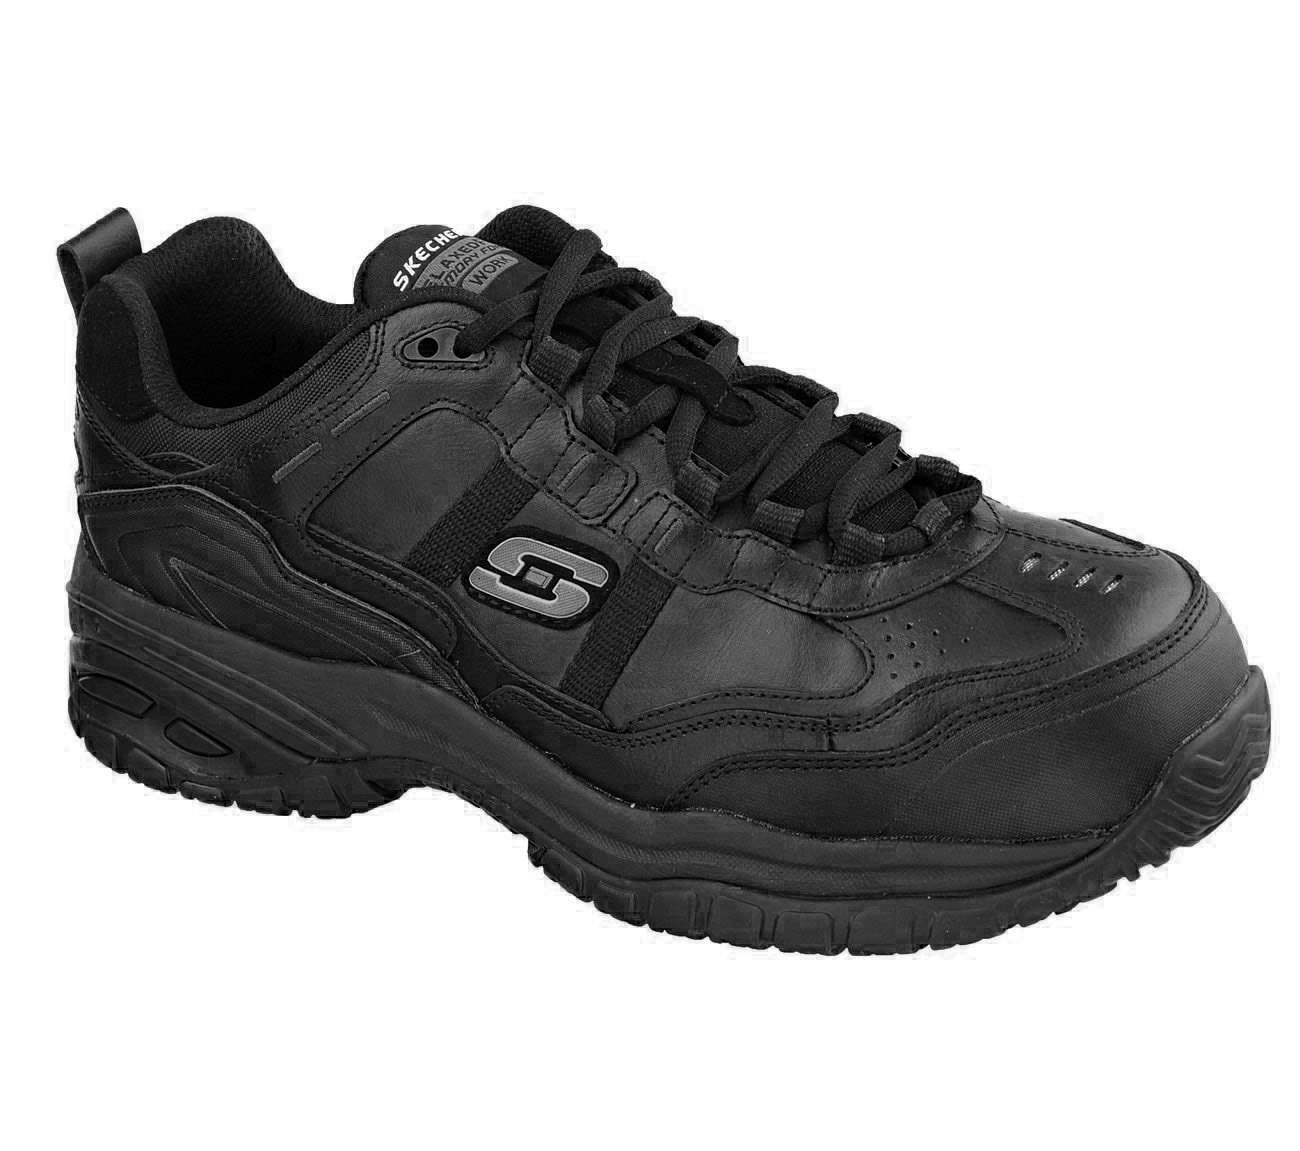 extra wide composite toe safety shoes